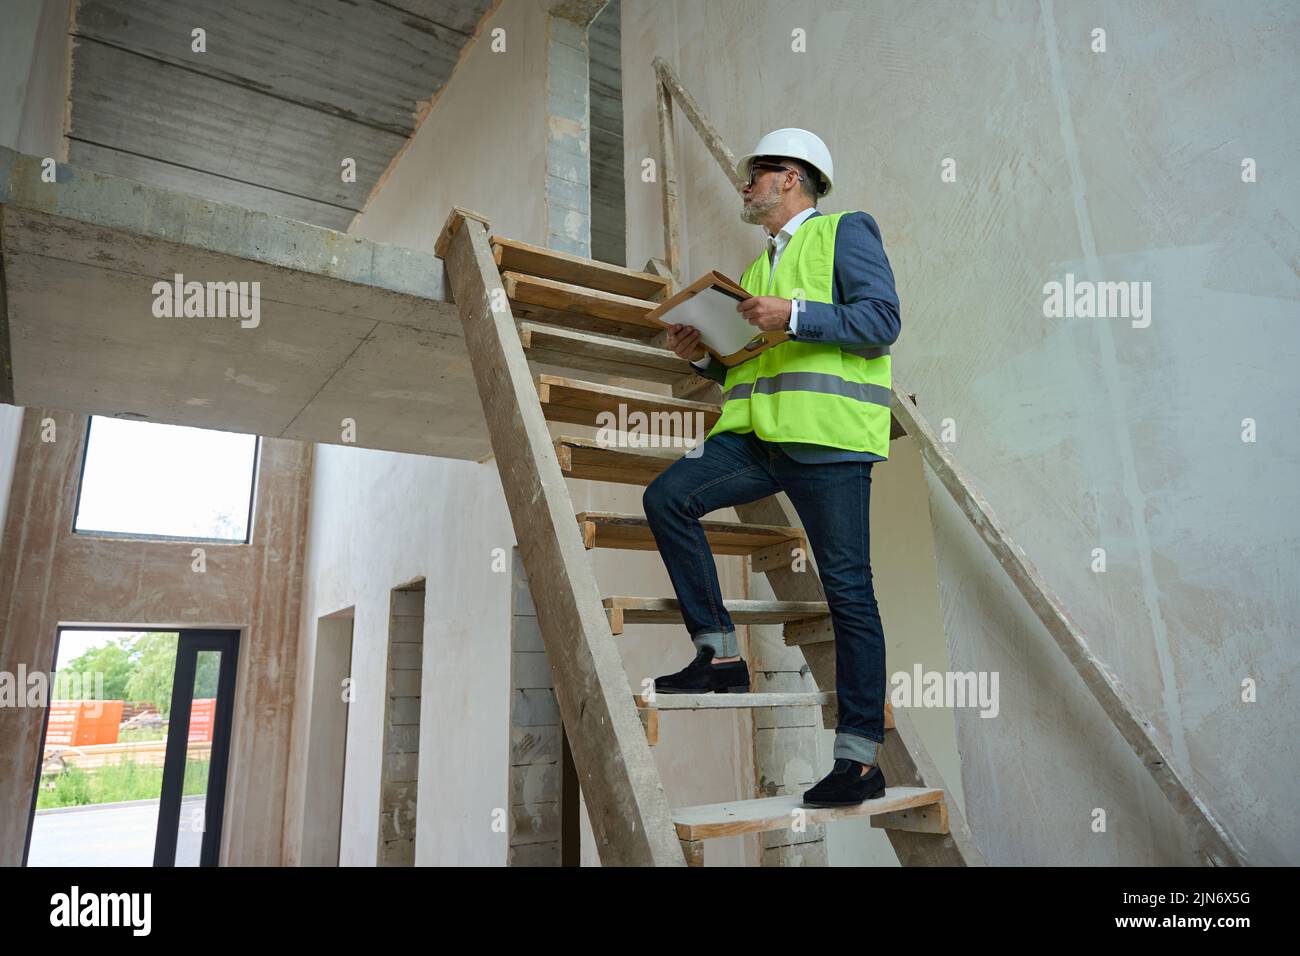 Male foreman climbs wooden ladder in unfinished house Stock Photo